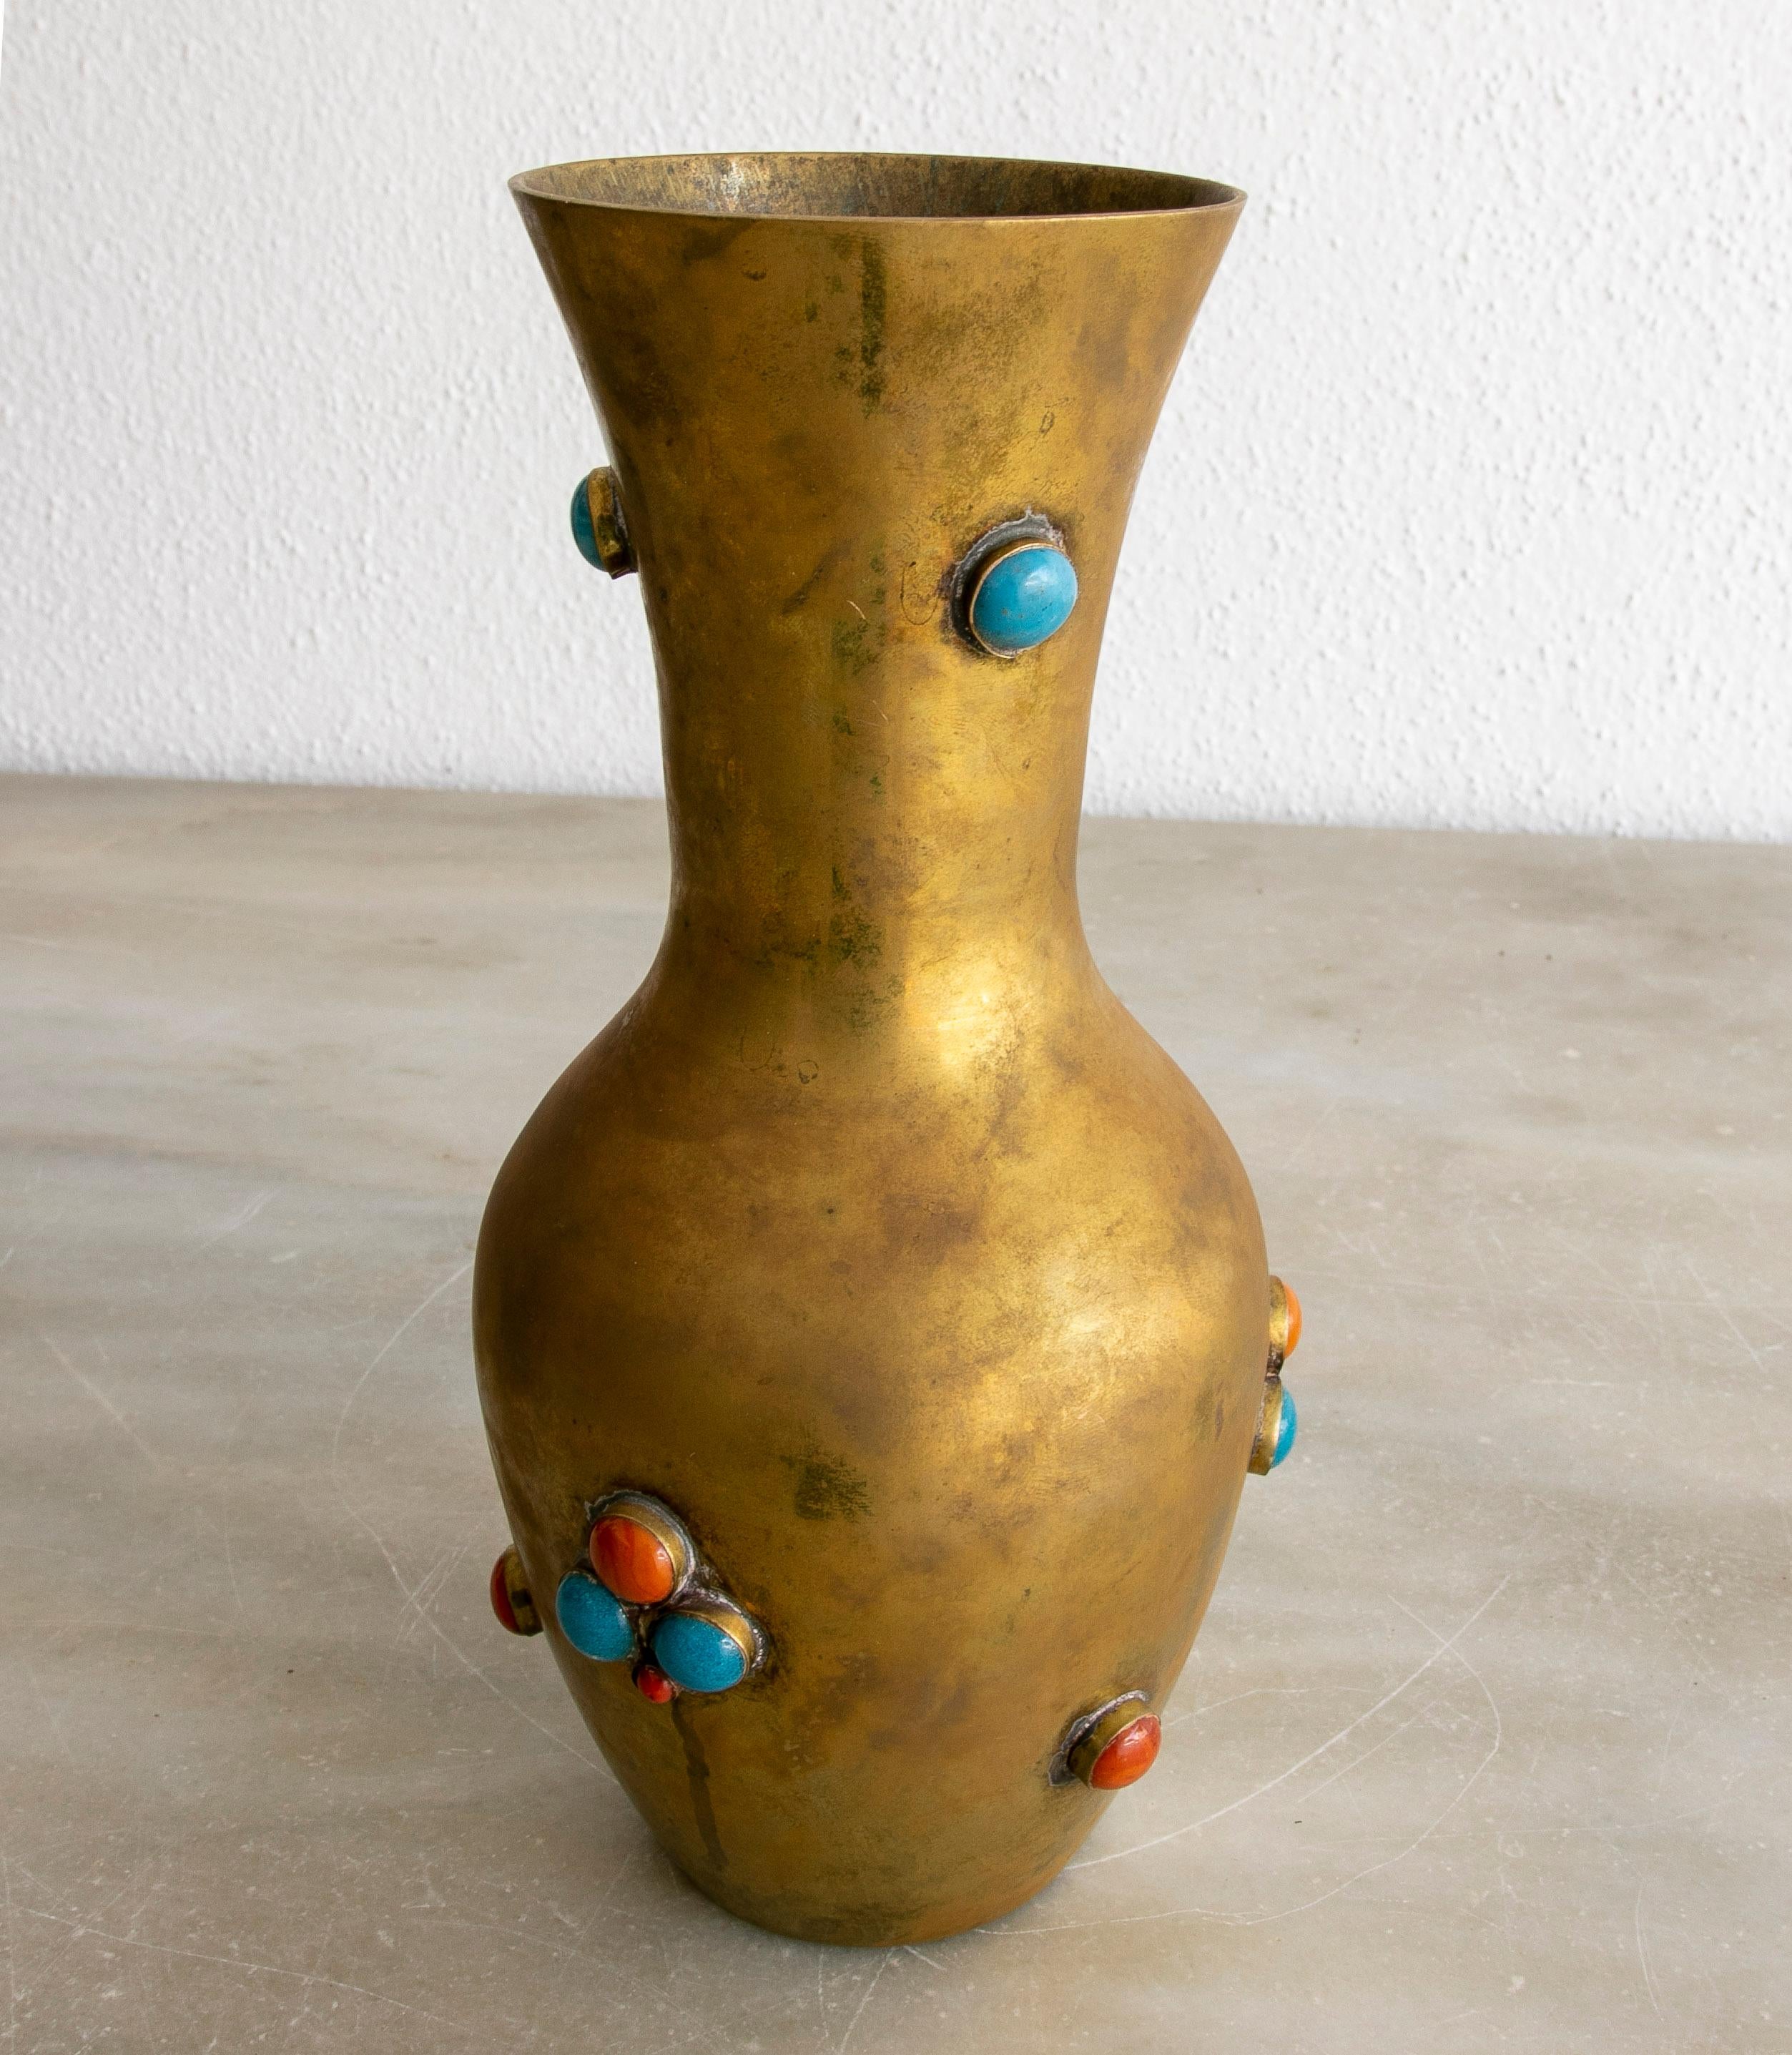 Vintage 1980s Spanish gilt bronze vase with red and turquoise inlaid stones.